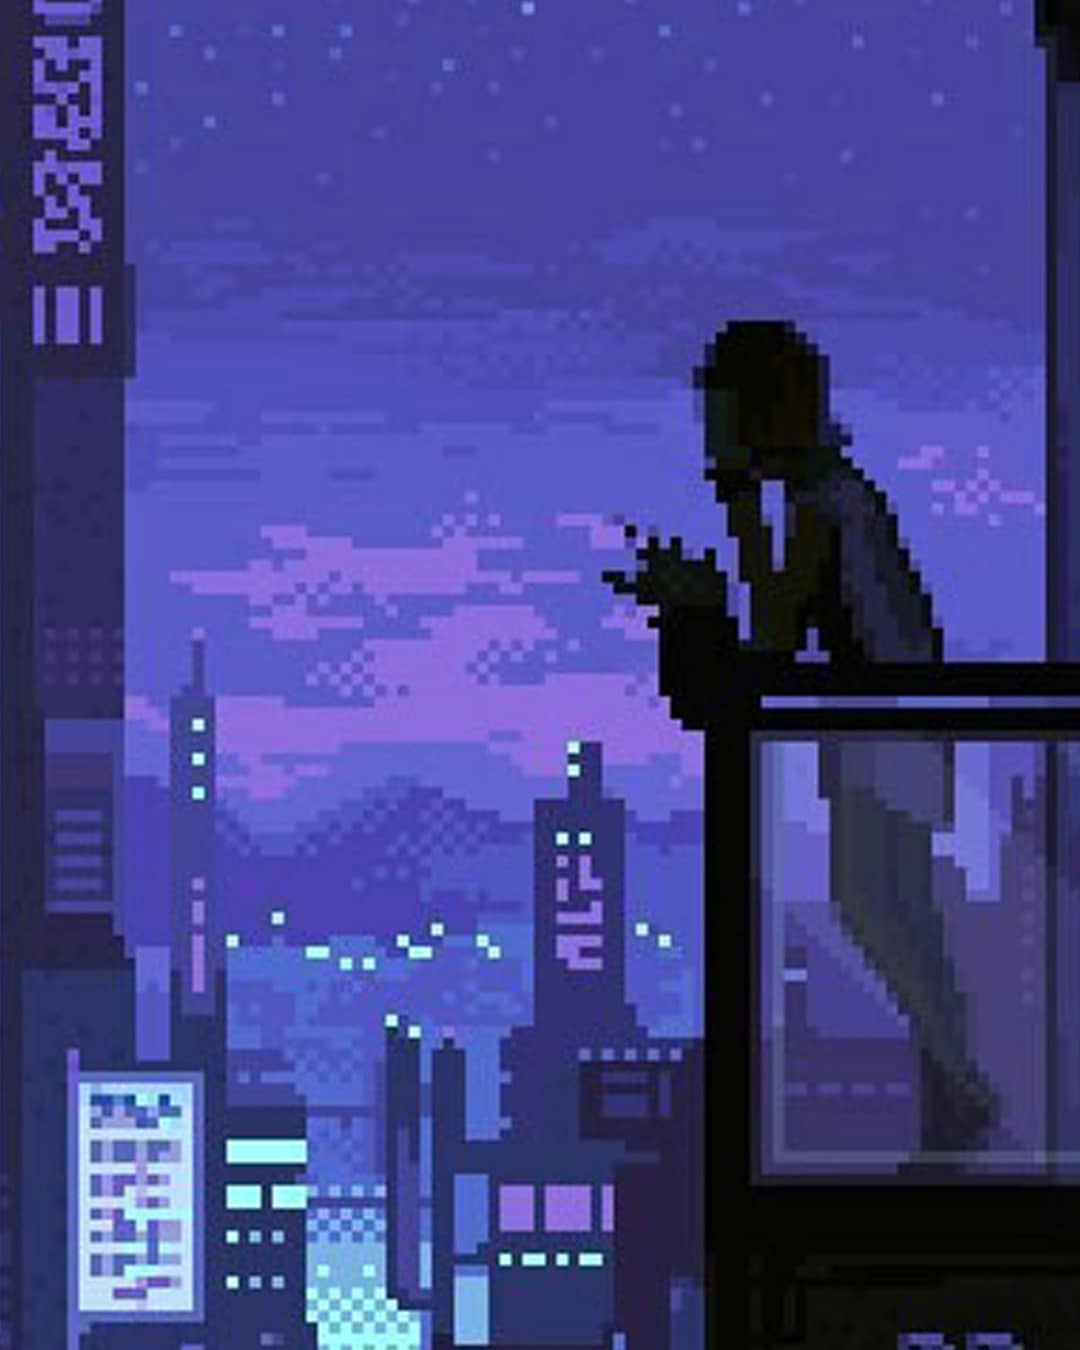 Pixel art of a person looking at a phone on a balcony at night - Lo fi